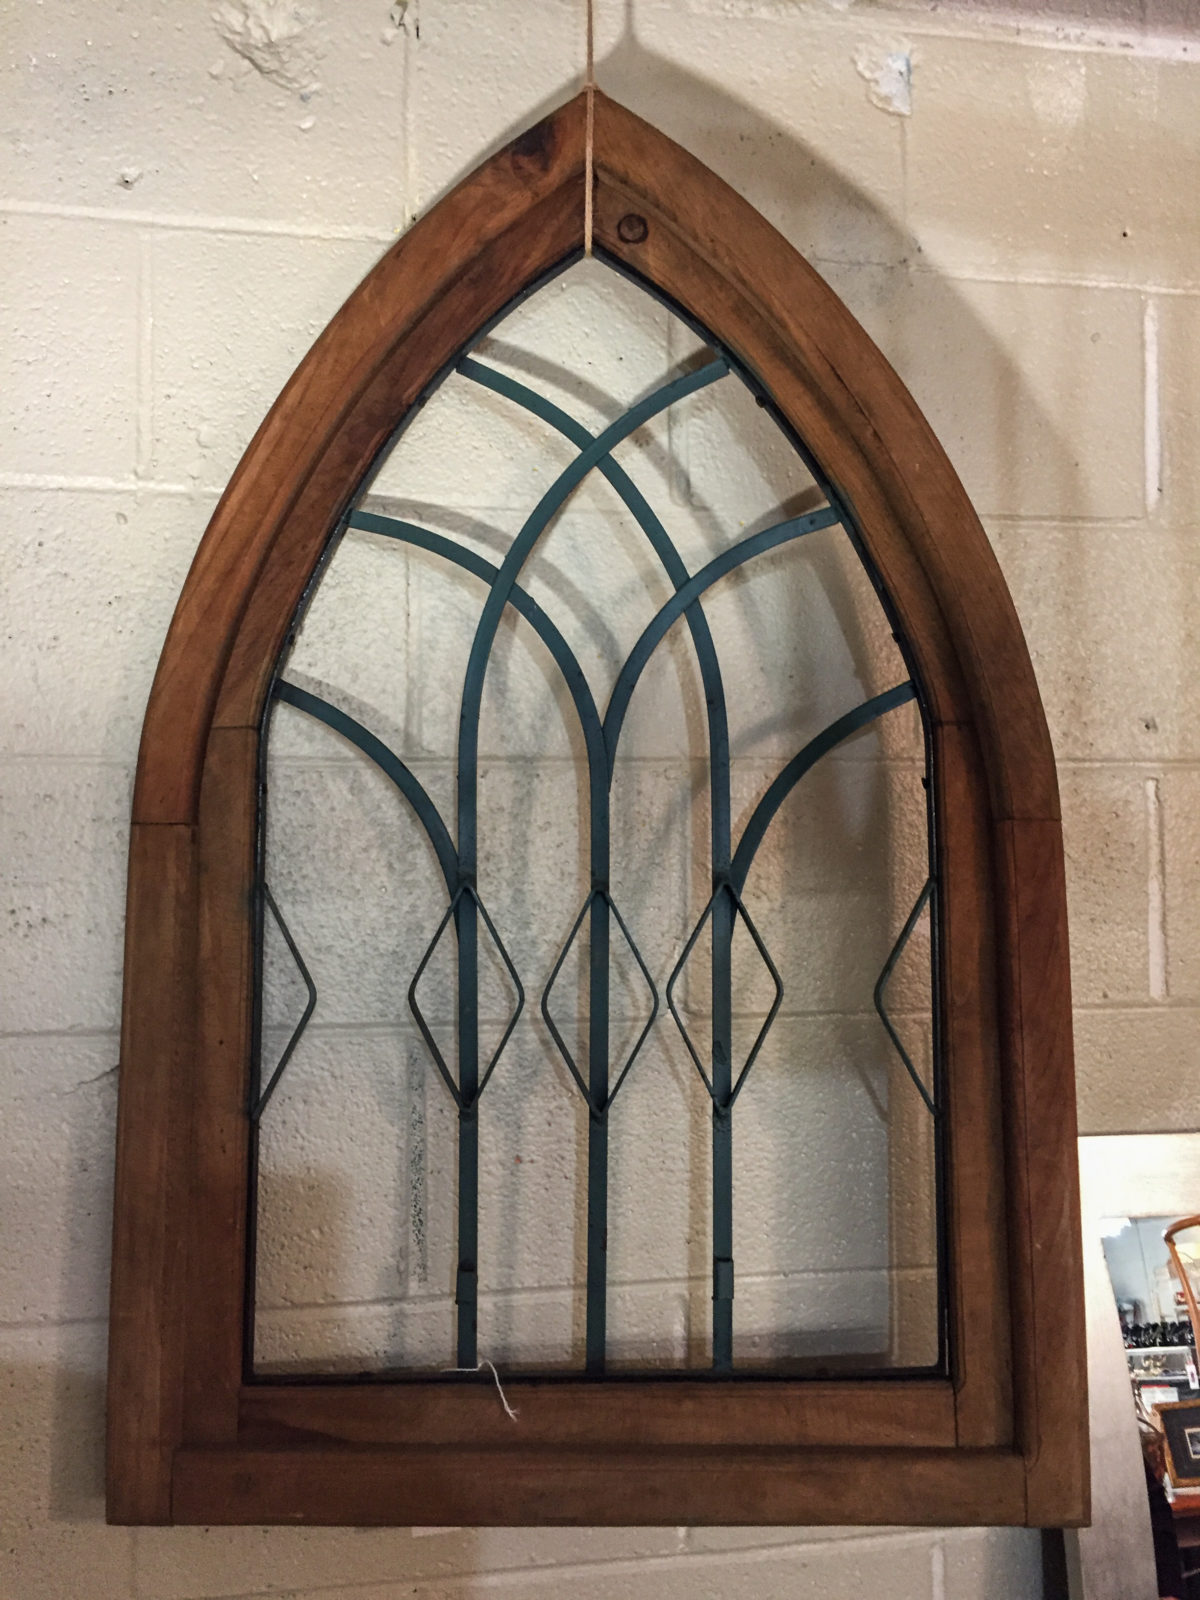 Cathedral Arch Window Decor • Measures 40" x 26". Great decor item to hang on a wall or sit on a mantle or console table. Ready for paint or stain if desired.